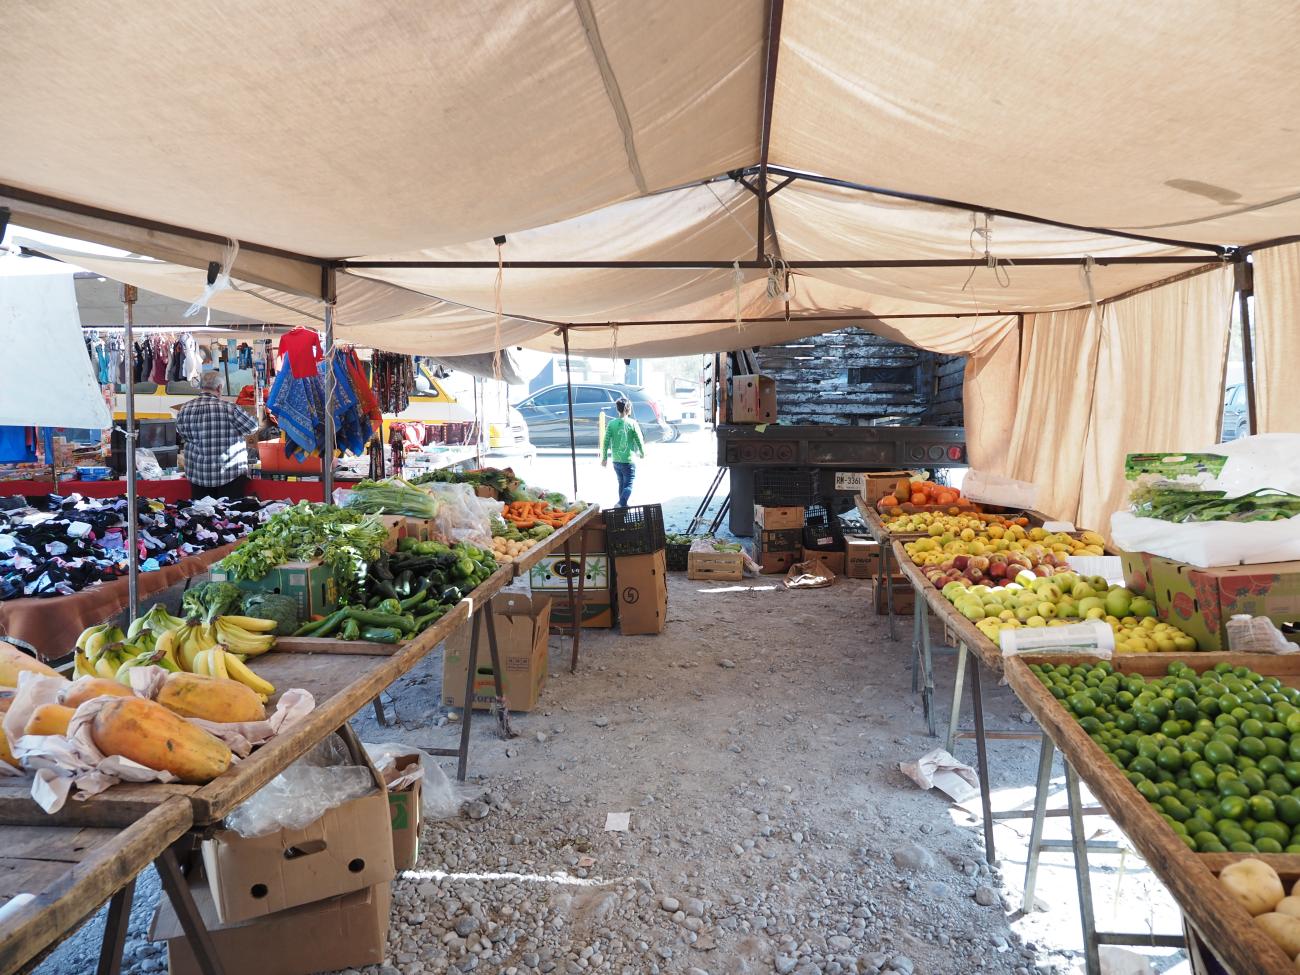 The Friday market in Hidalgo where fruits, vegetables and everything you need for a meal are sold at affordable prices. December 30, 2022.